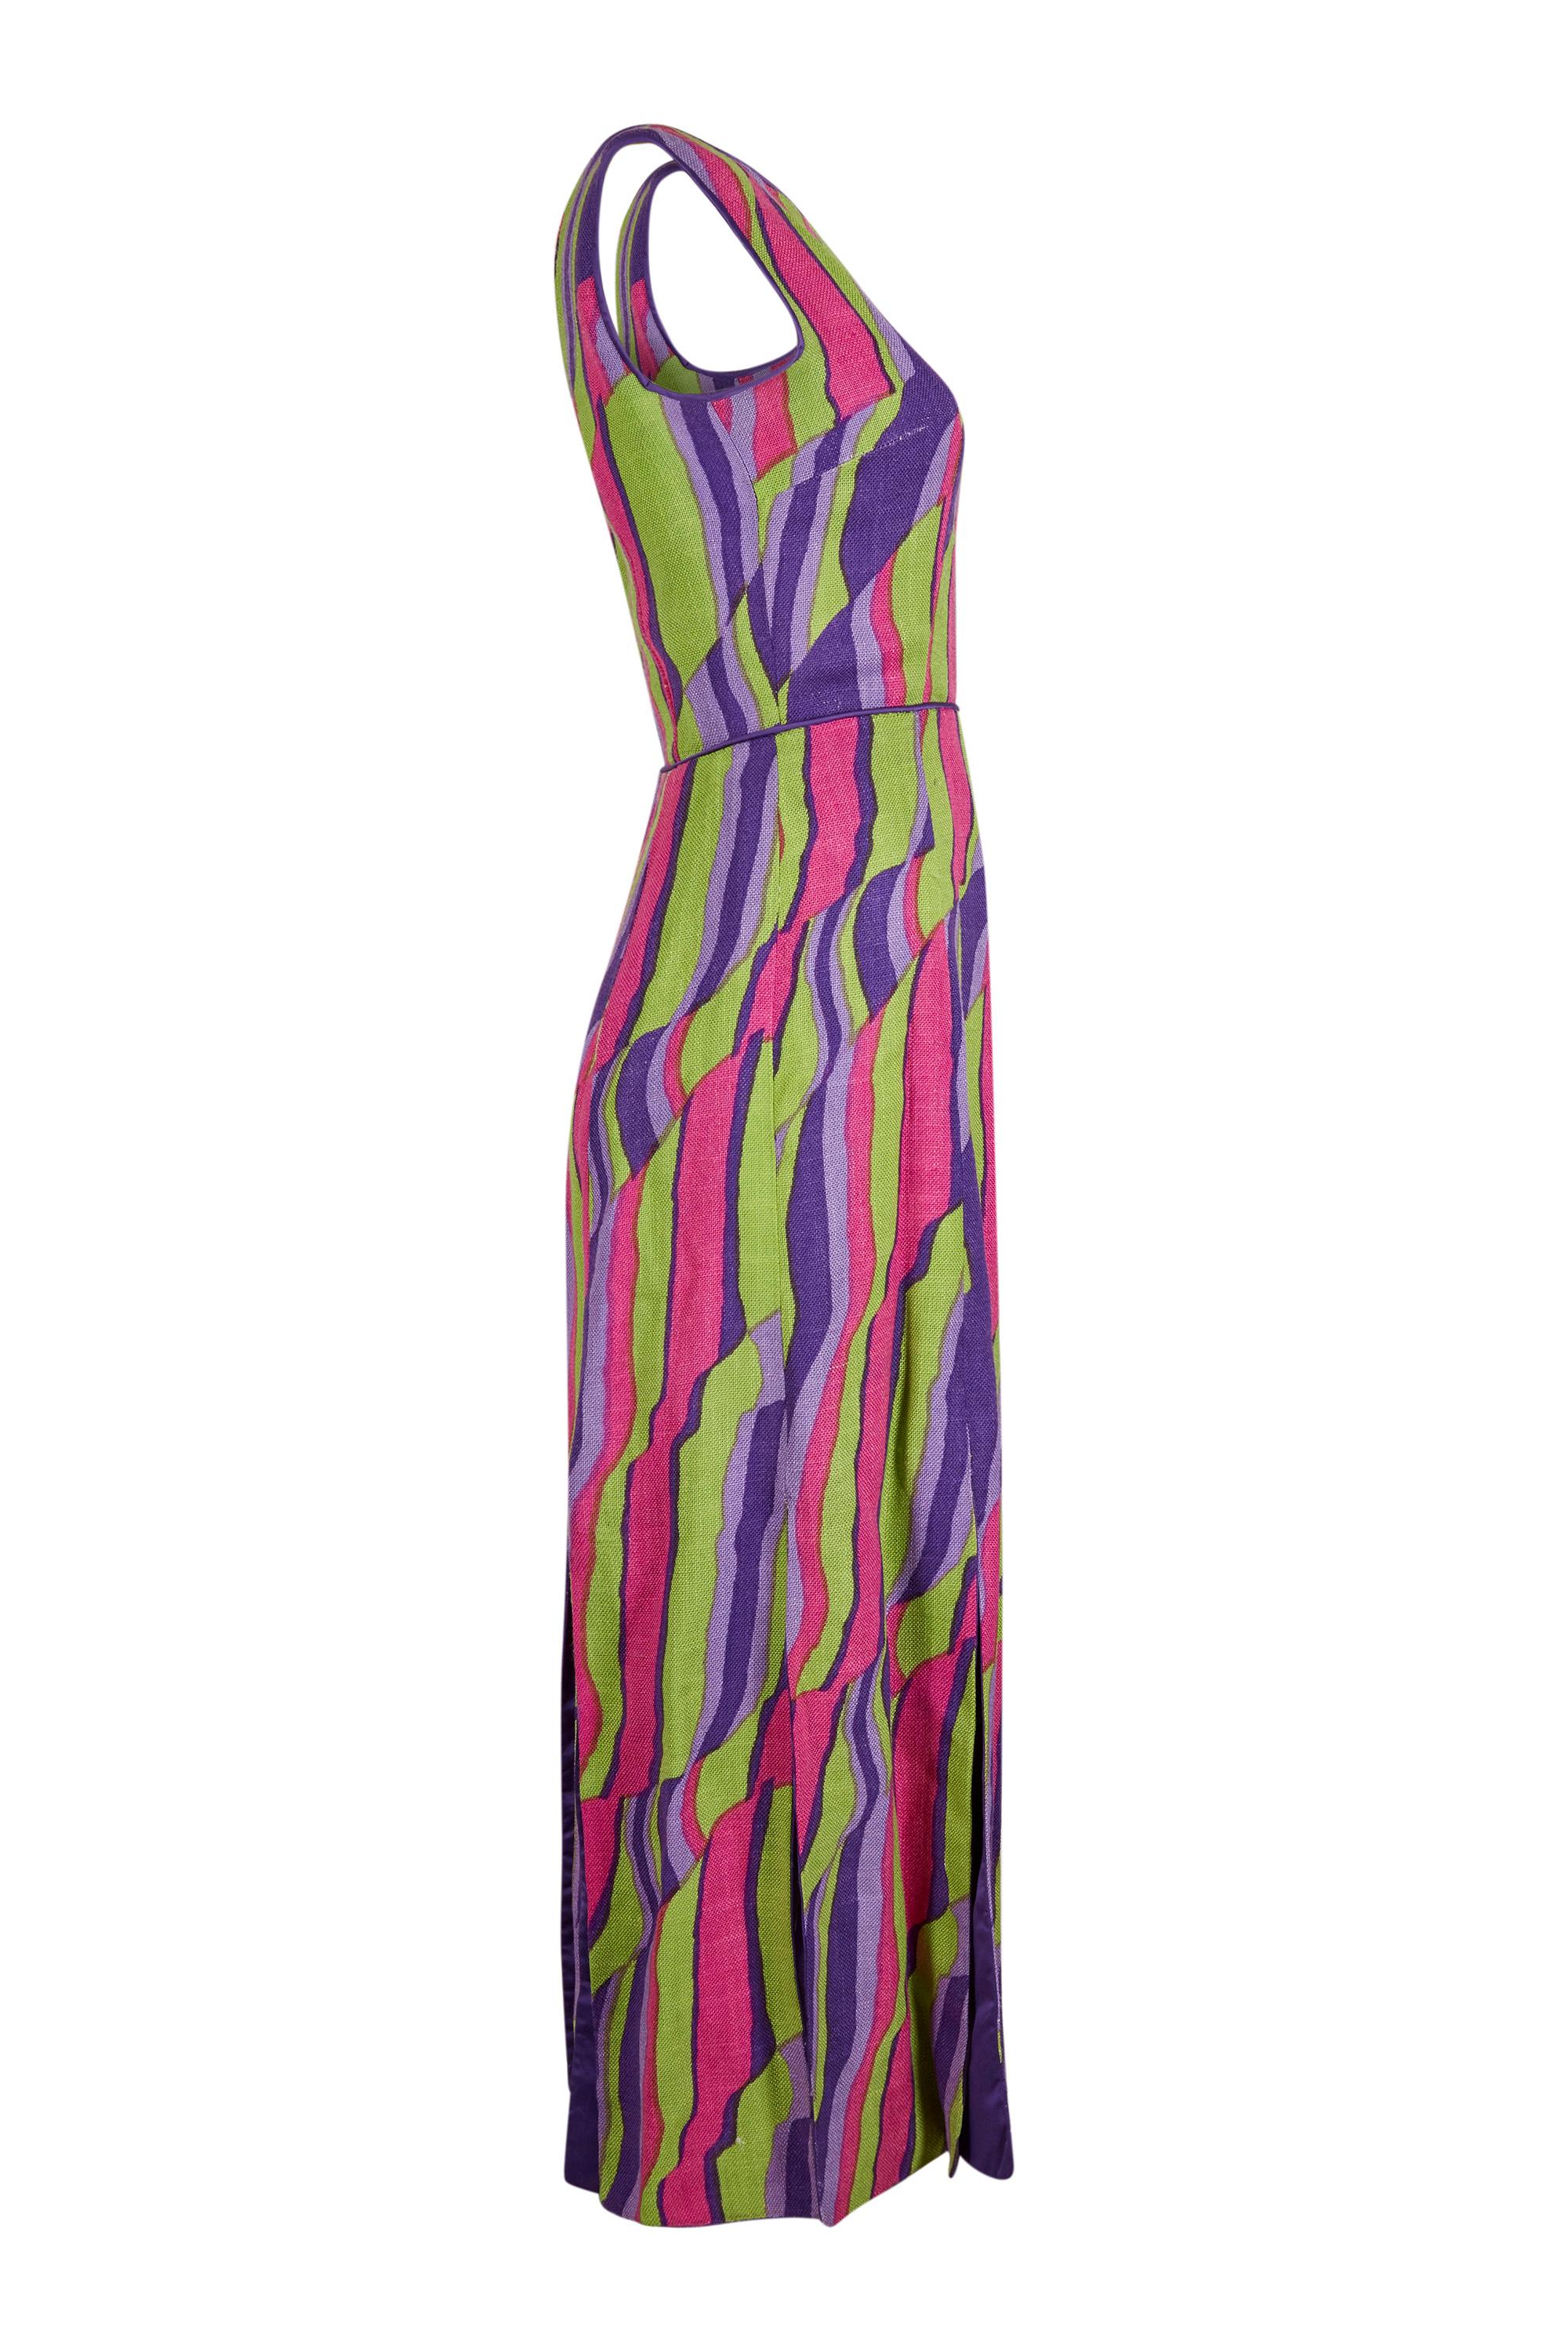 This dynamic 1960s linen and silk abstract print maxi dress is unlabelled, although its magnificent construction reveals that it is demi-couture and probably made by a leading designer of the era. The linen overlay features a striking abstract